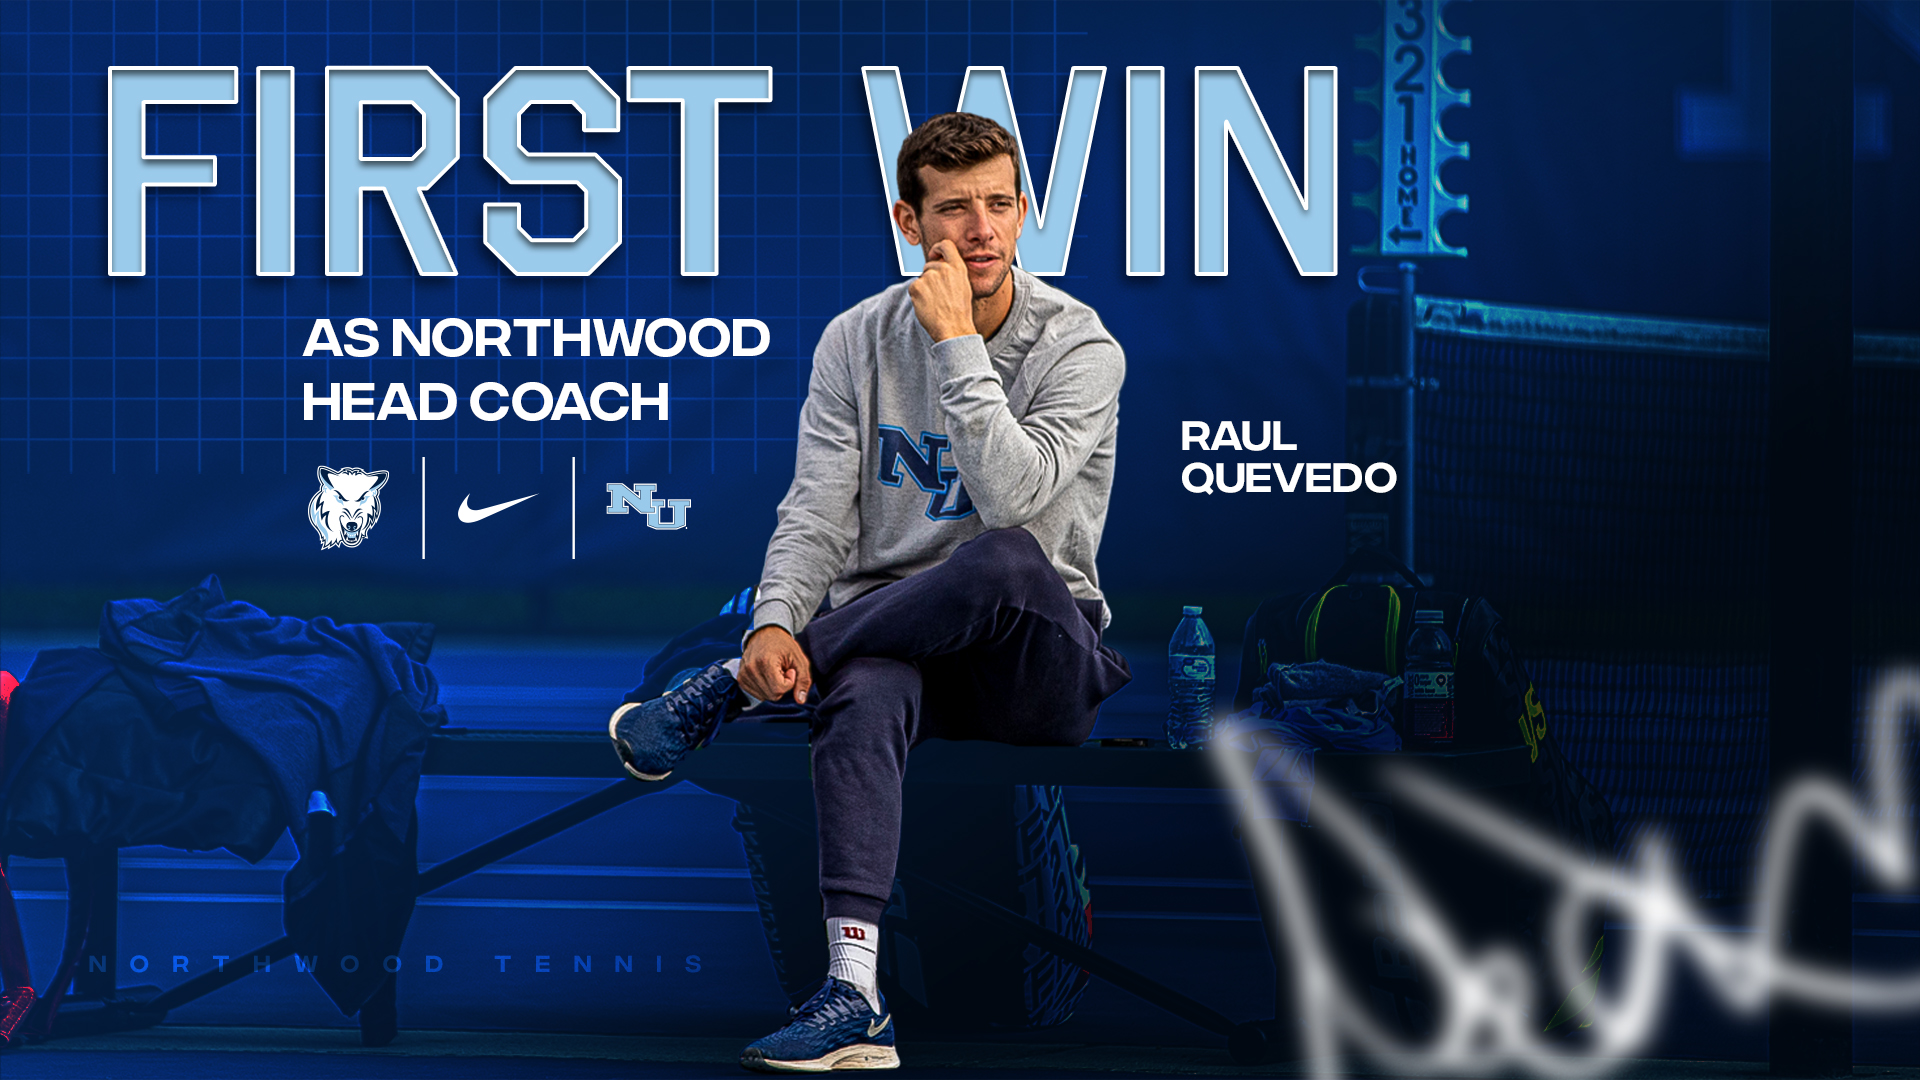 Northwood Women’s Tennis Opens up the Season with a Win in Raul Quevedo’s First Match